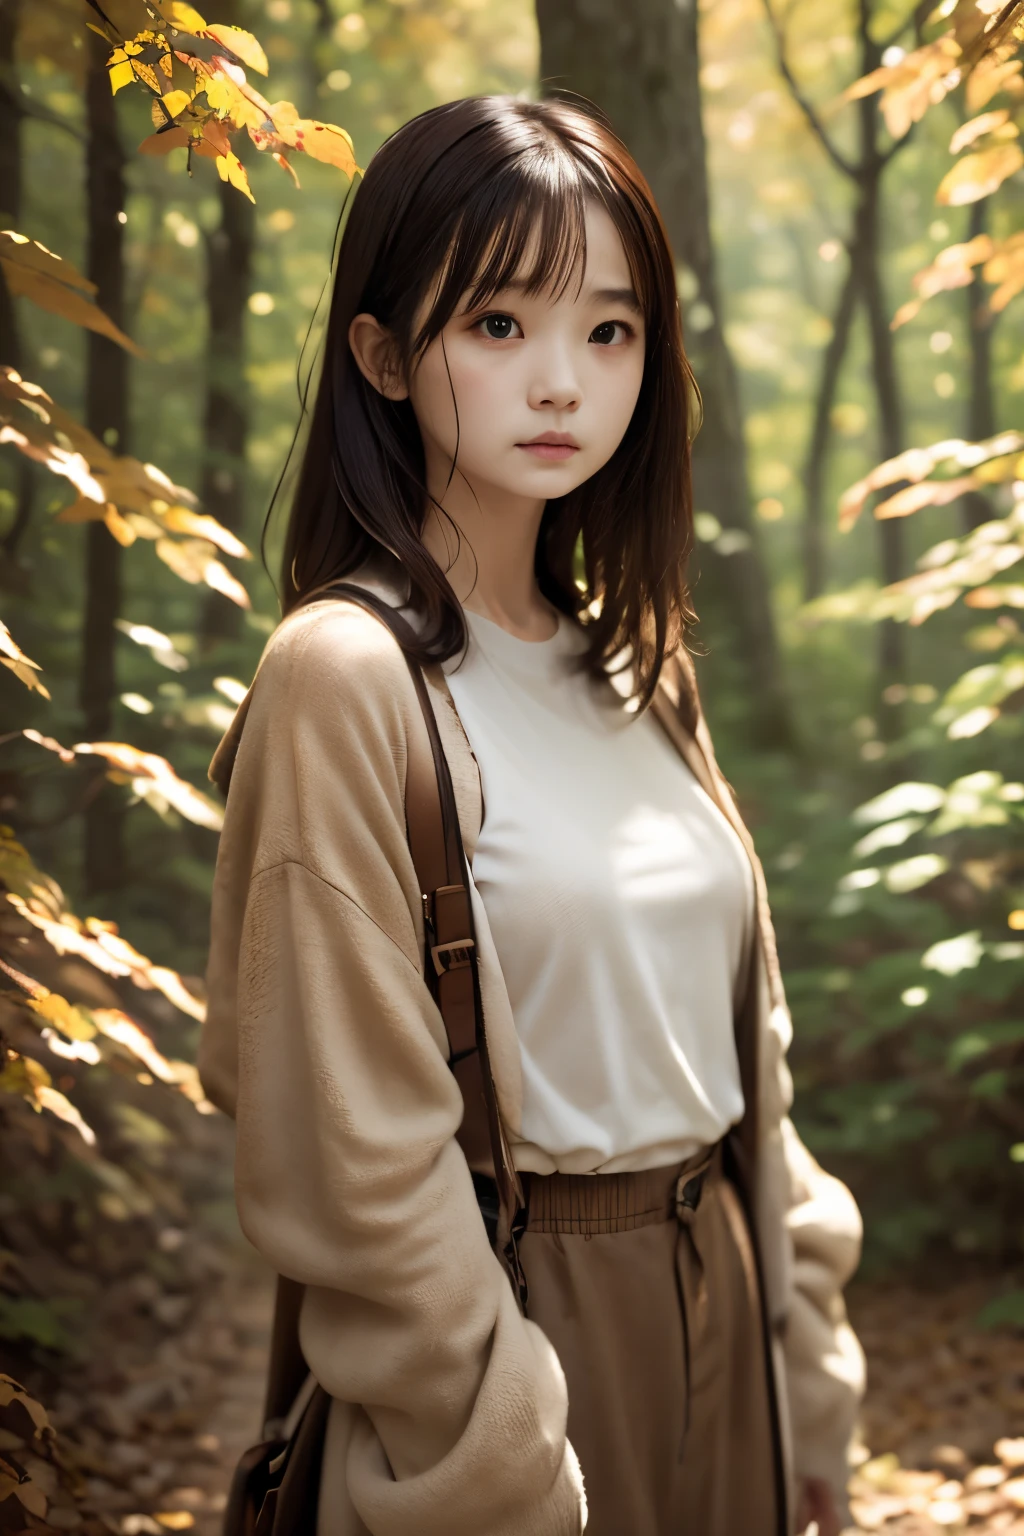 masuter piece、solo、Little woman、short-cut、Natural color clothing、Natural look、top-quality、Ultra-detail、High quality detailing、８ｋ、Colored leaves:1.5、deep autumn forest、Tree leakage day、Silence